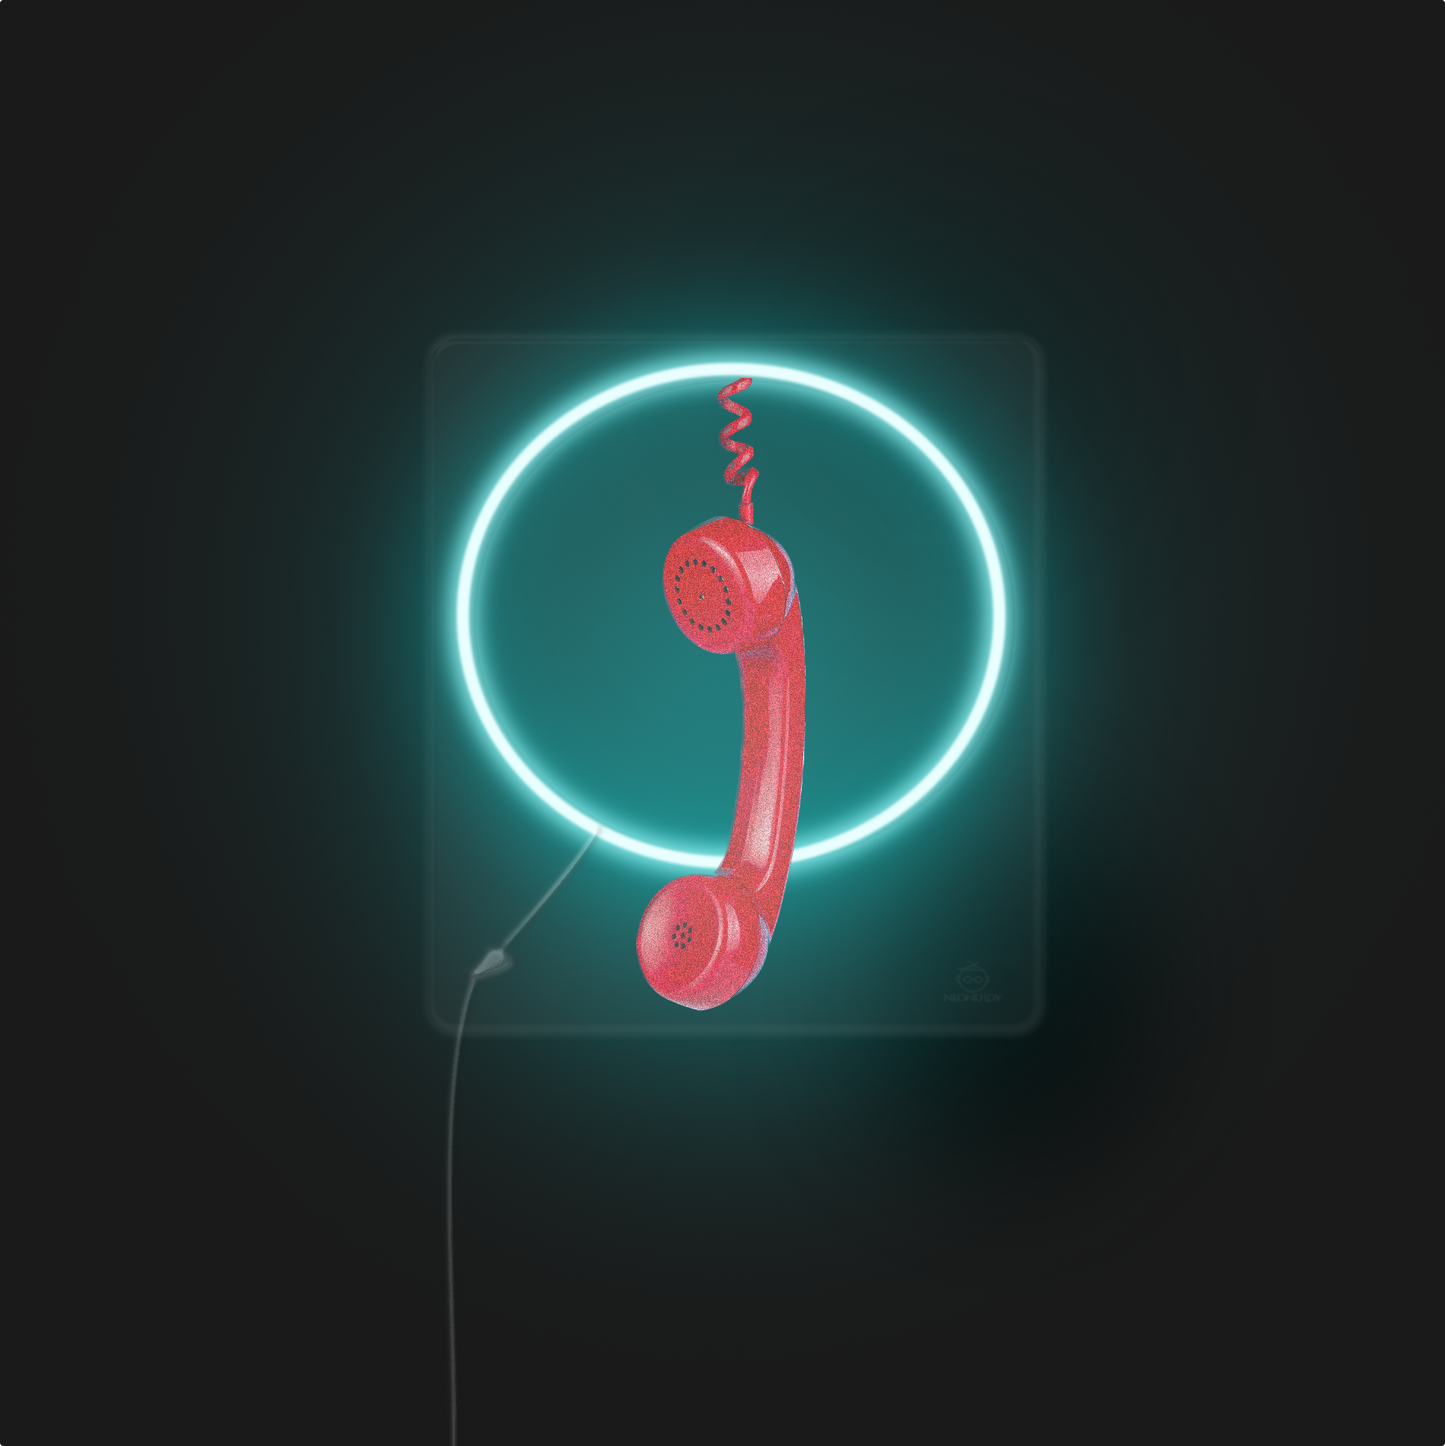 Old telephone by sergio rojoes neonerdy.design